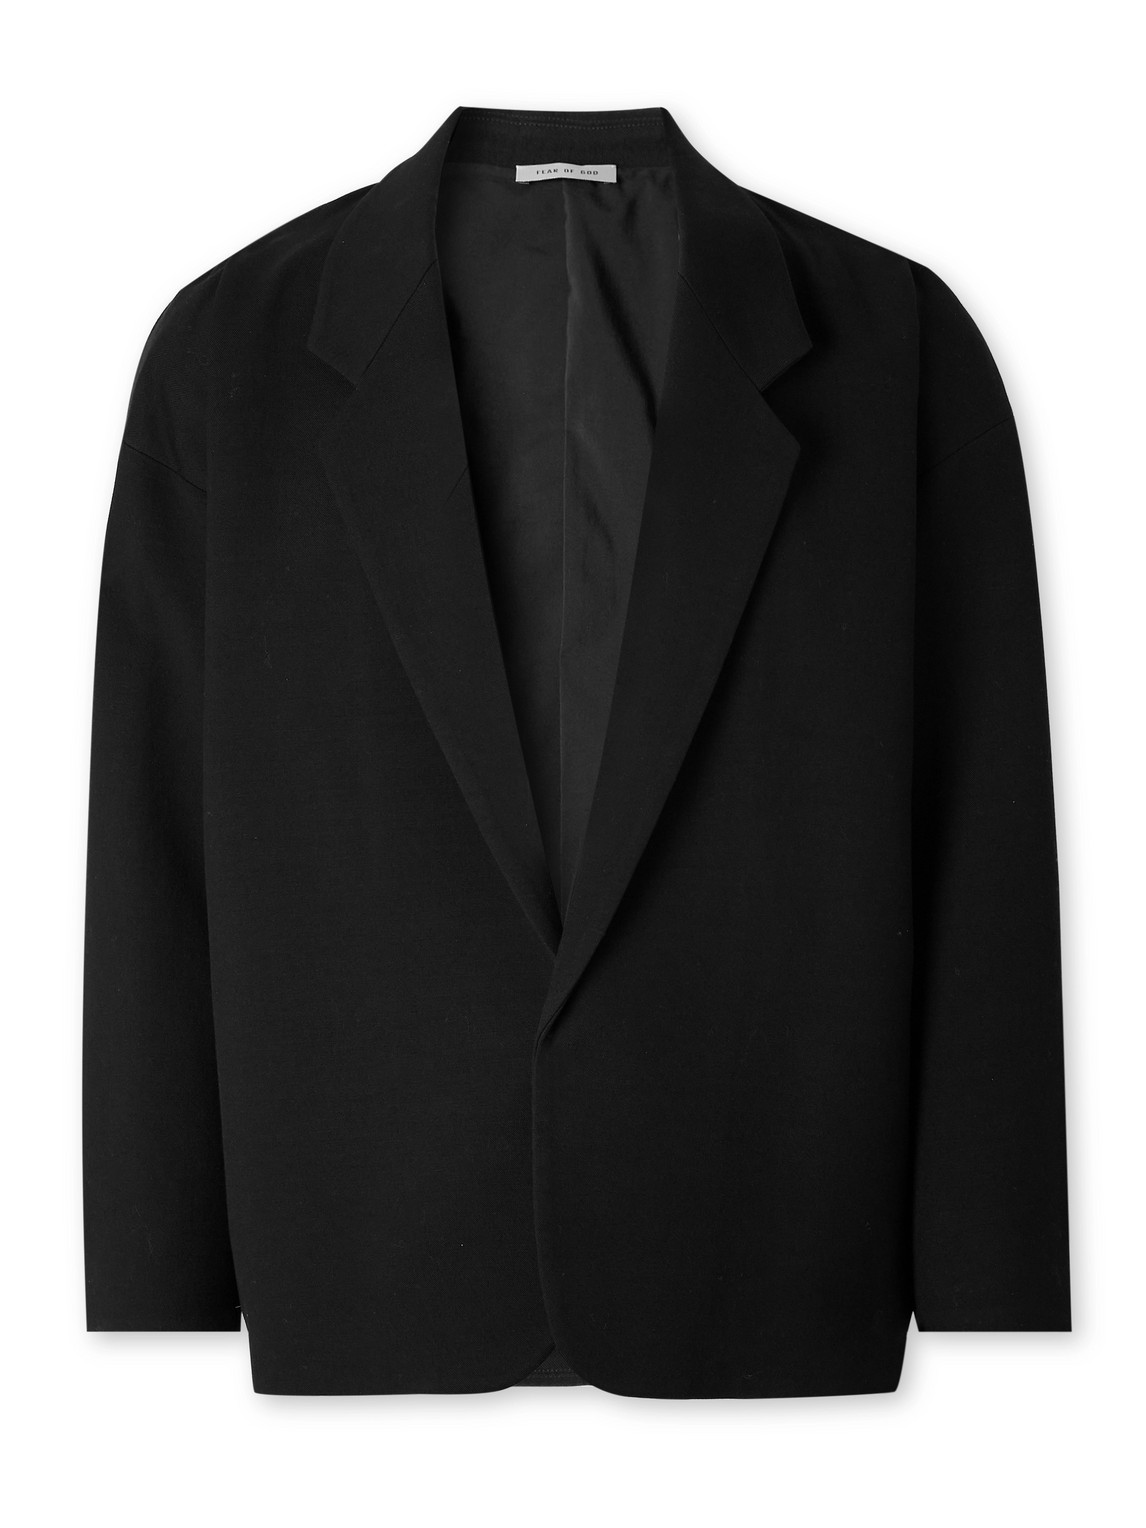 8th California Double-Faced Cotton and Wool-Blend Twill Blazer